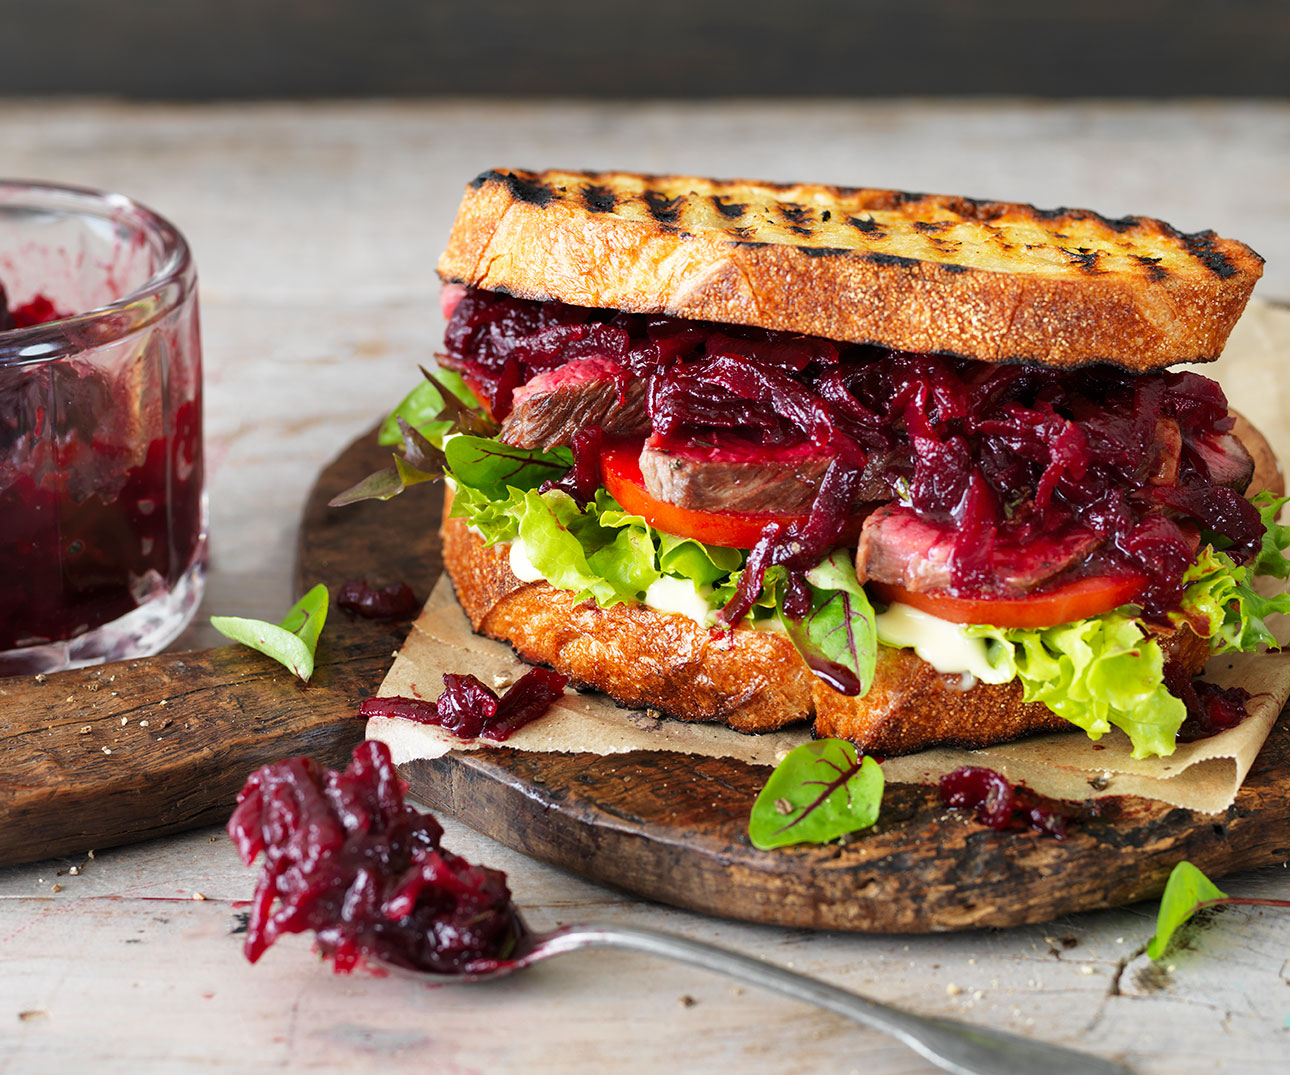 Caramelised Onion And Beetroot Relish